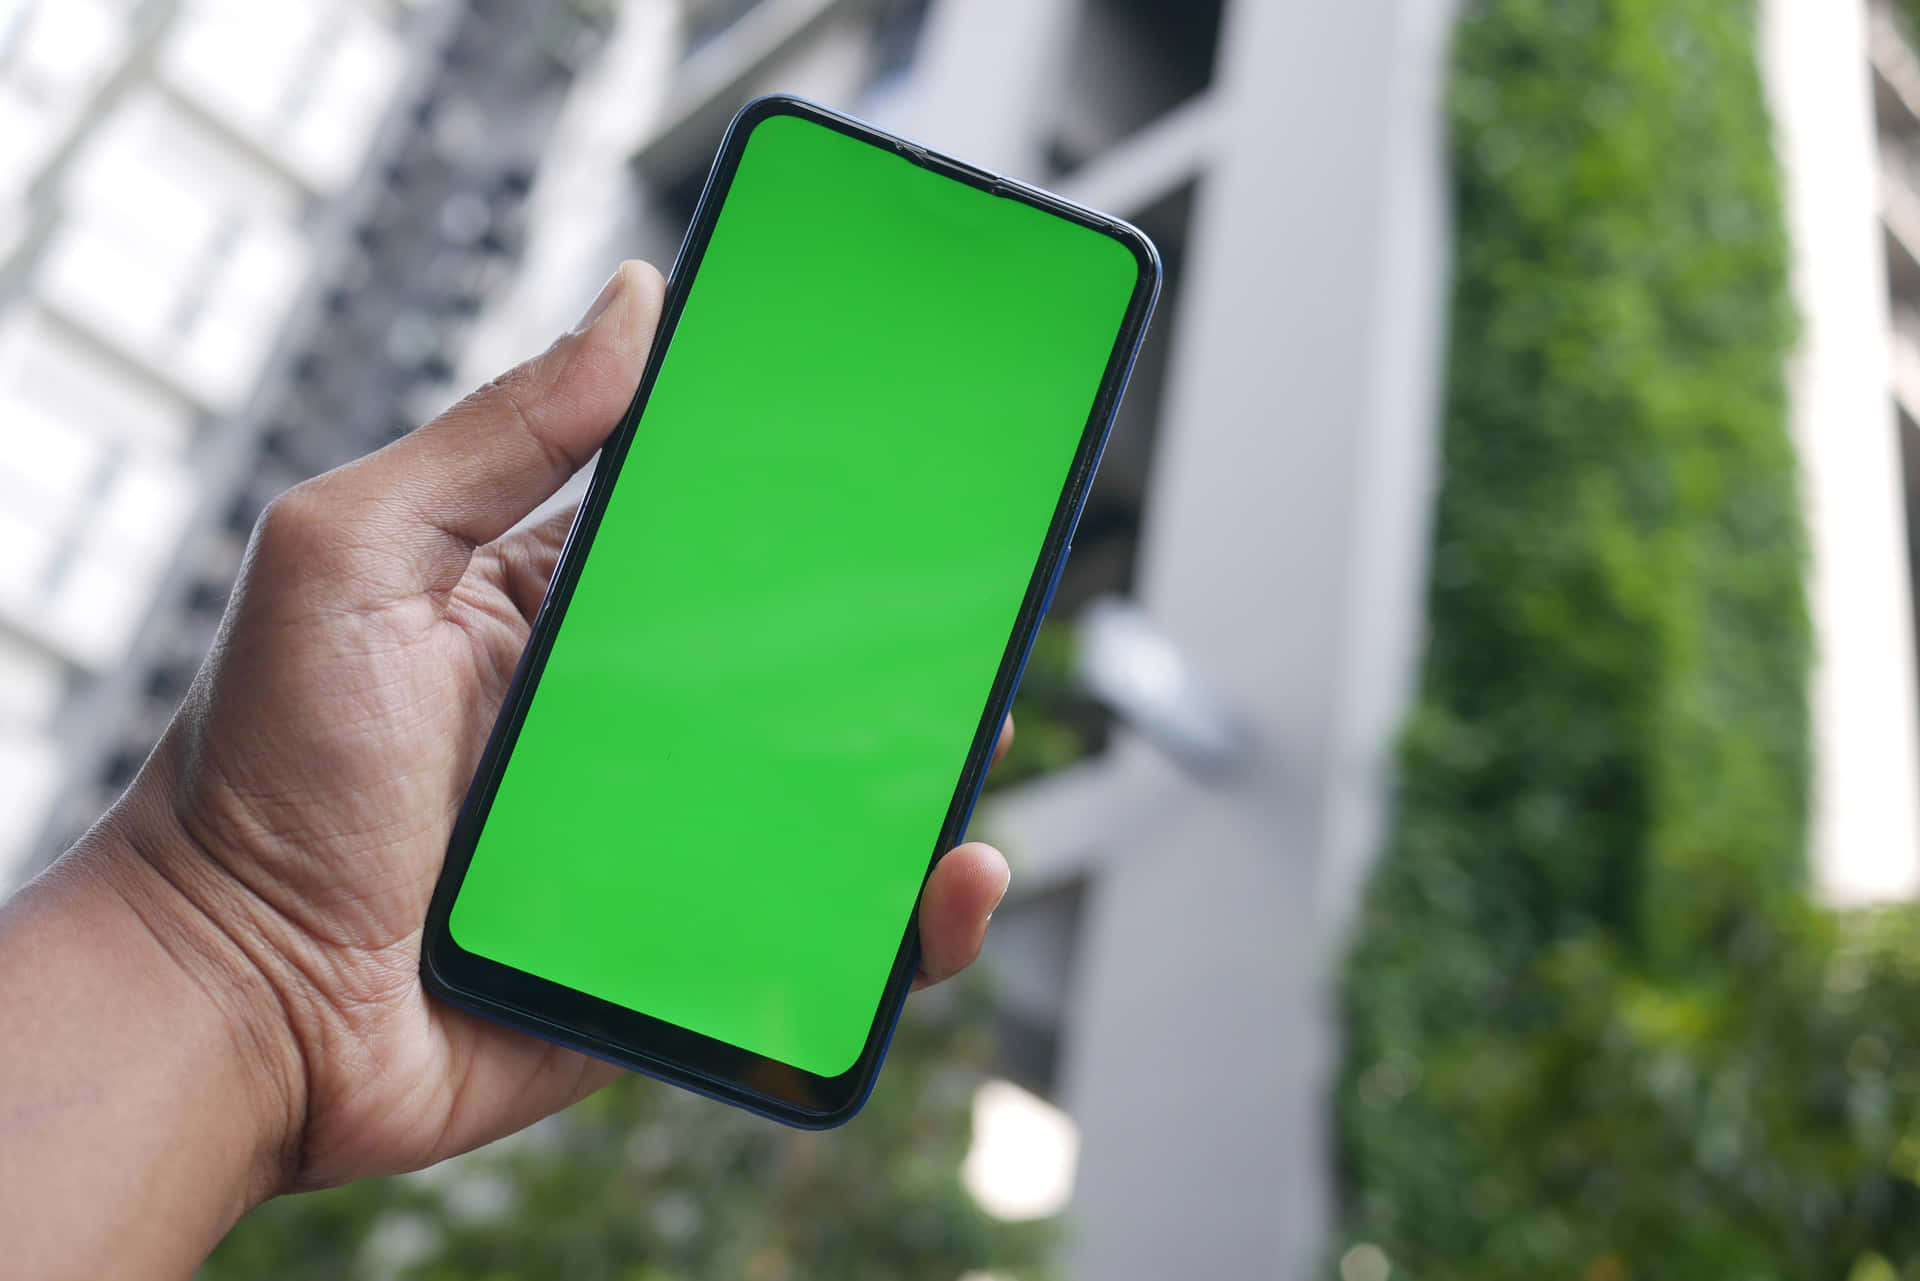 A Man Holding A Green Screen Smartphone In Front Of A Building